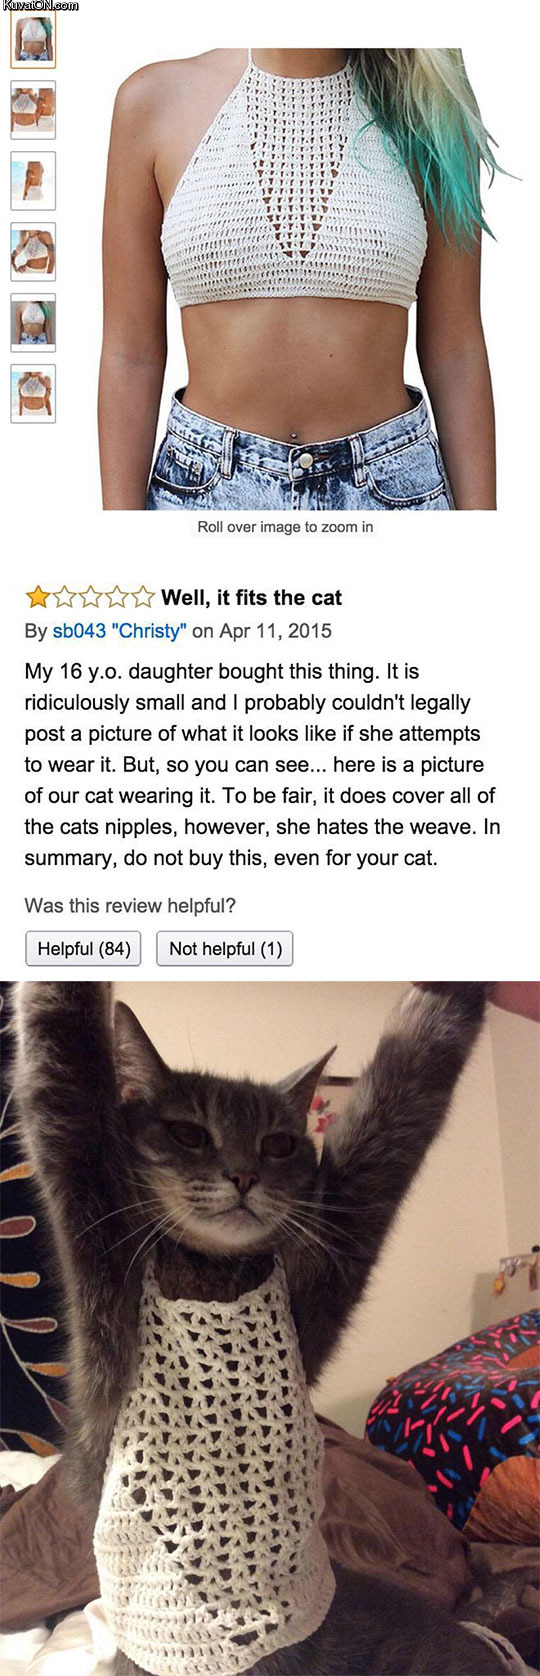 do_not_buy_it_even_for_your_cat.jpg